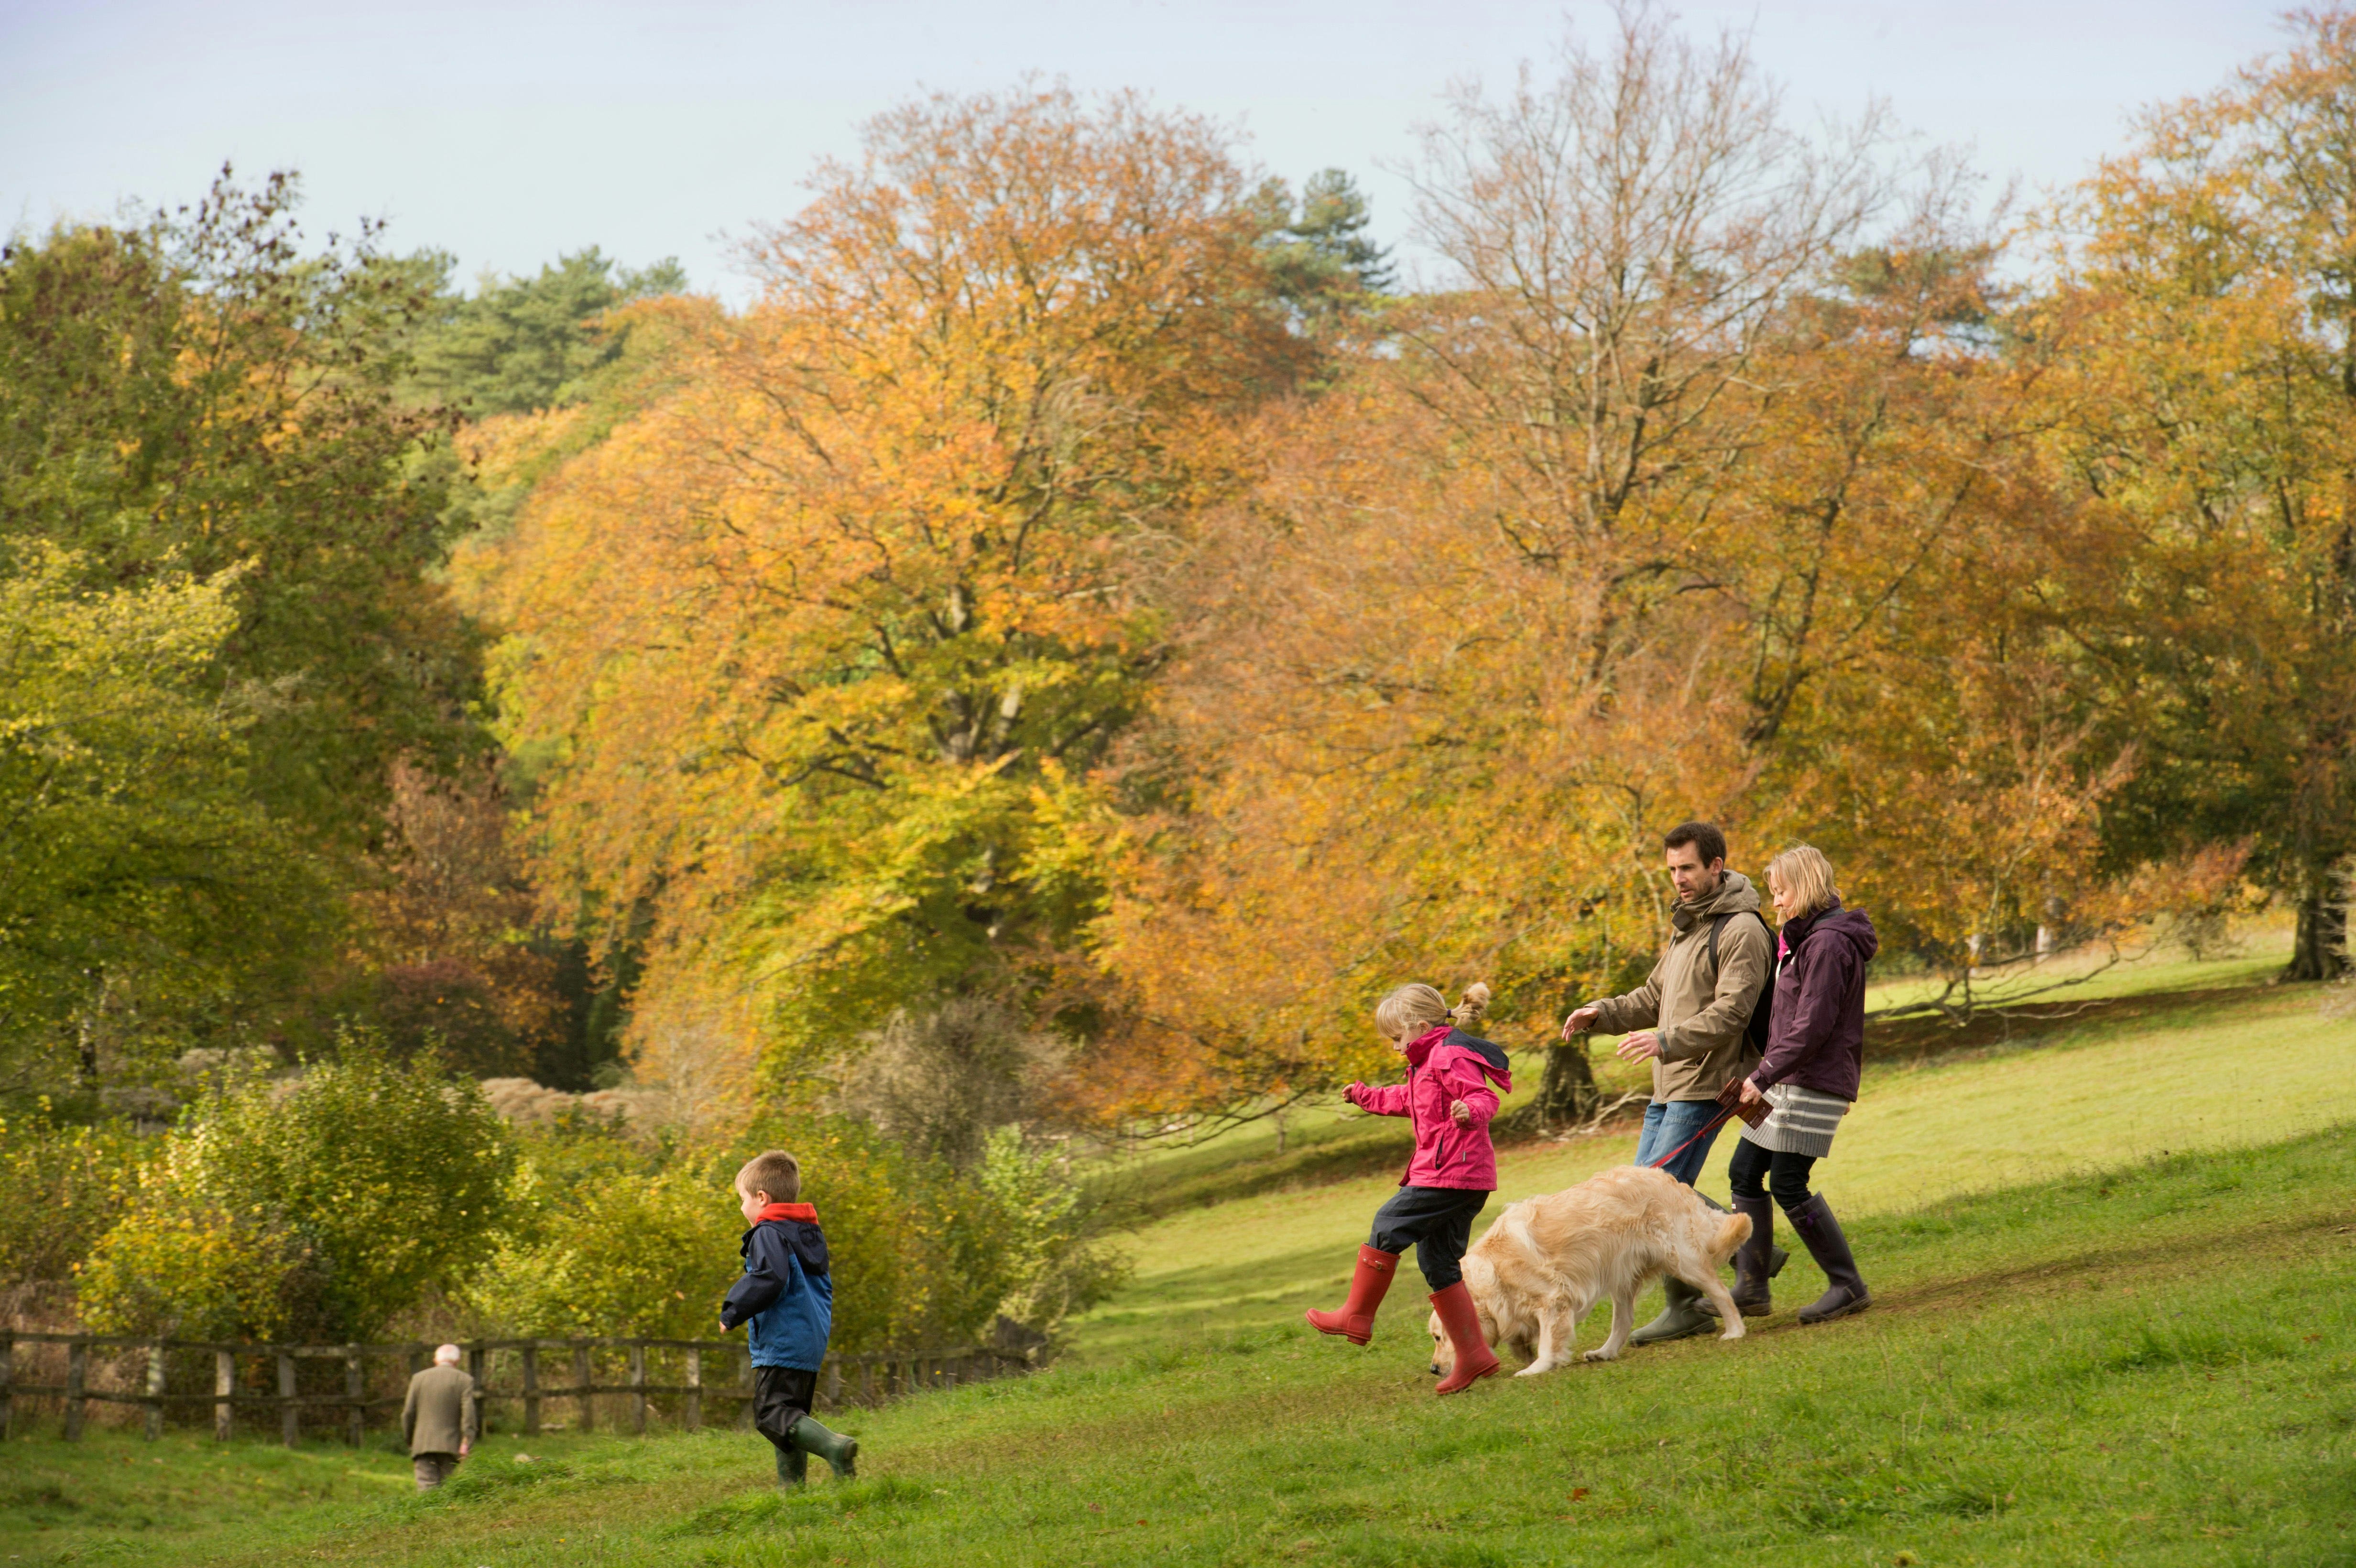 A family with a golden retriever takes in the autumn colors at Westonbirt Arboretum, Gloucestershire, the Cotswolds, England, United Kingdom